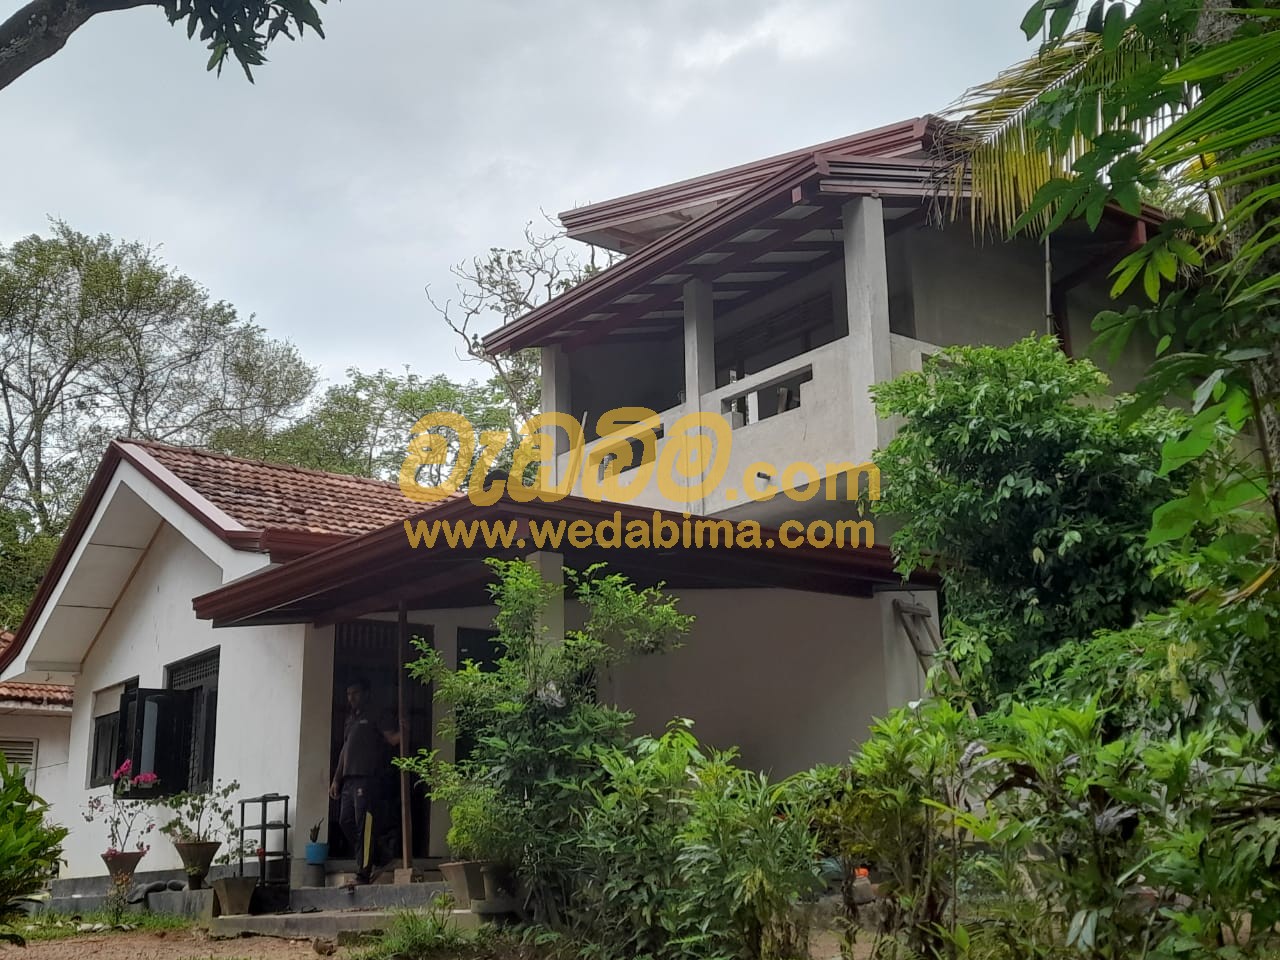 Roof Finishing For Best Price in Colombo